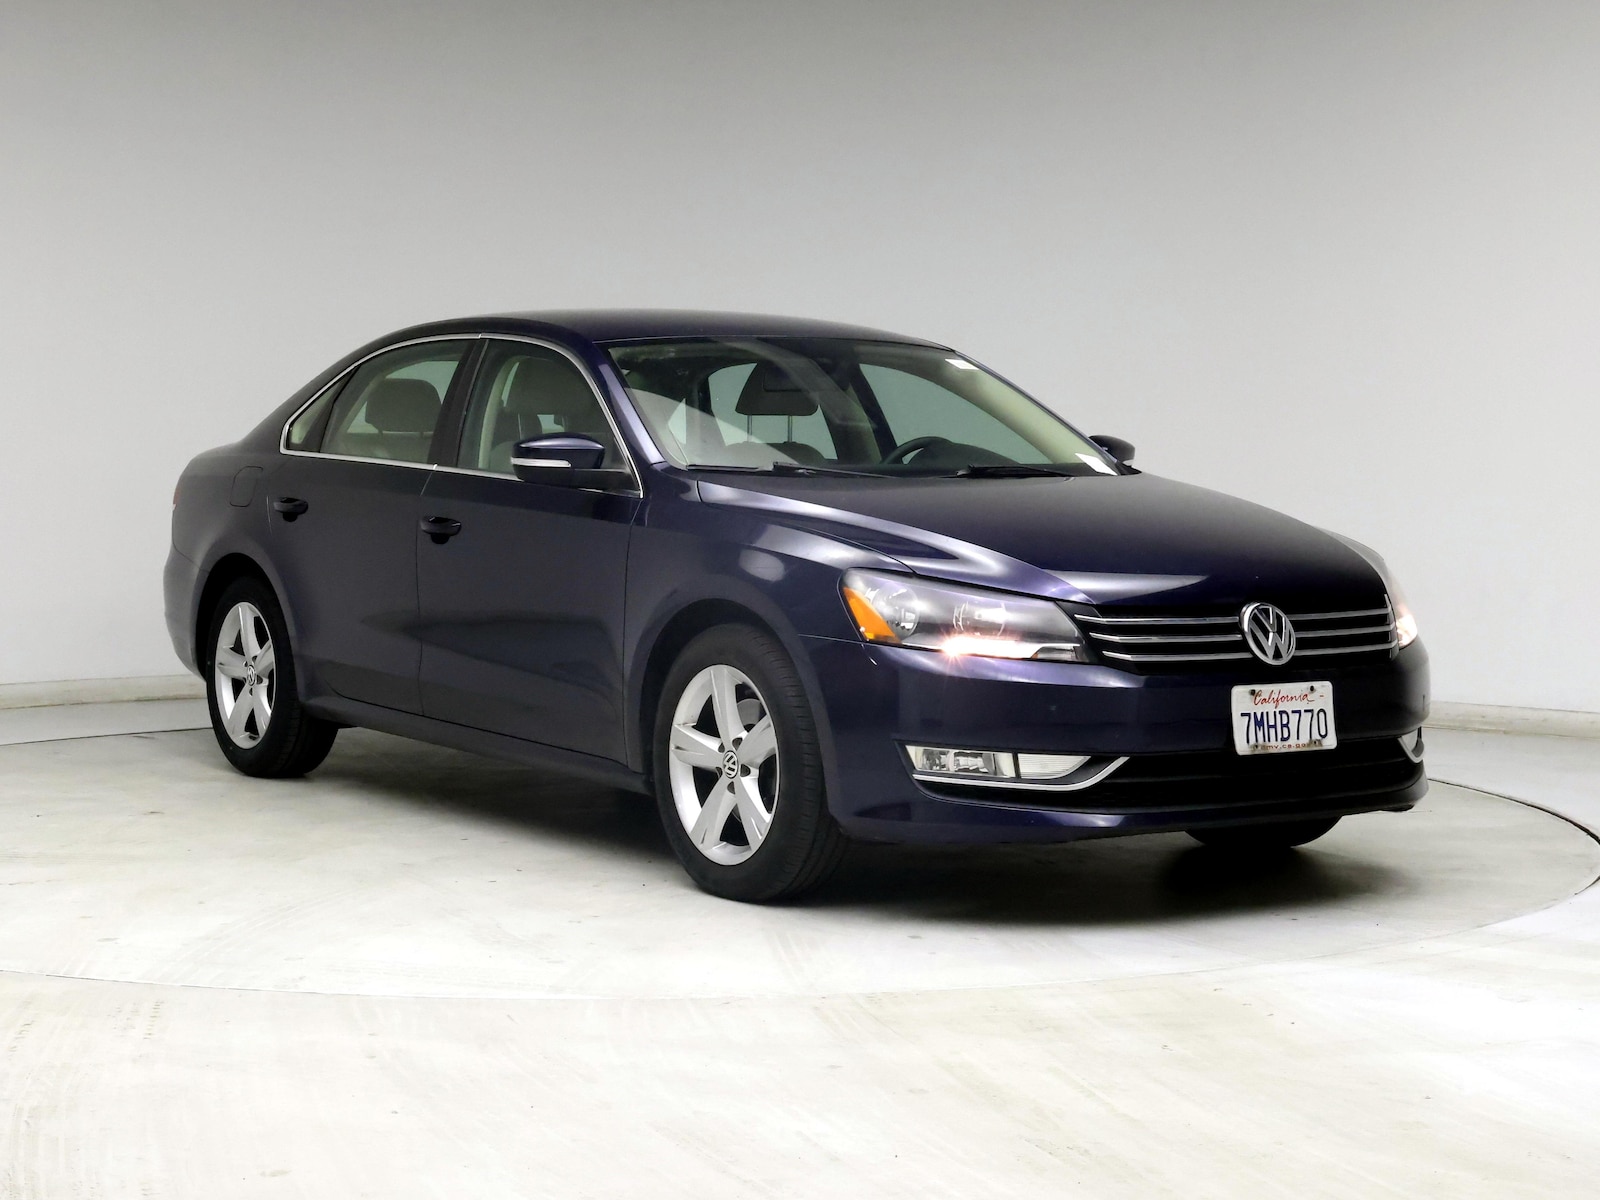 Used 2015 Volkswagen Passat Limited Edition with VIN 1VWAT7A30FC092163 for sale in Spokane Valley, WA